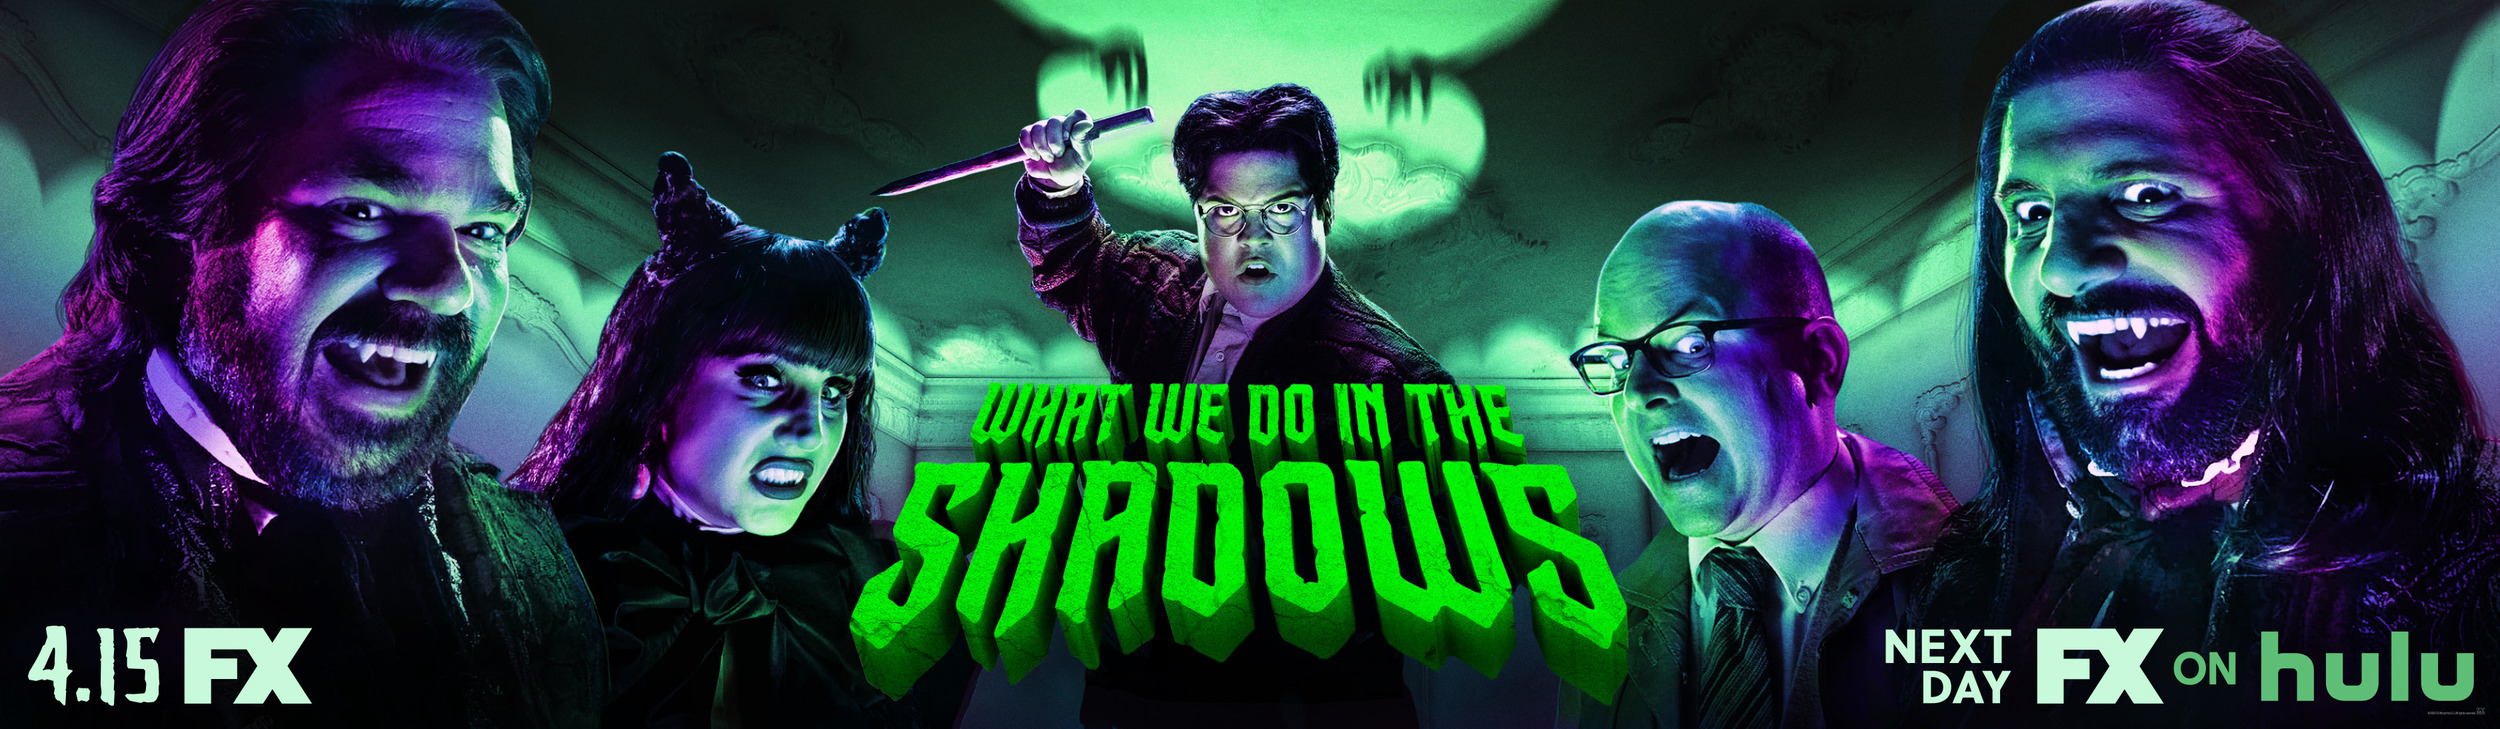 Mega Sized TV Poster Image for What We Do in the Shadows (#4 of 11)